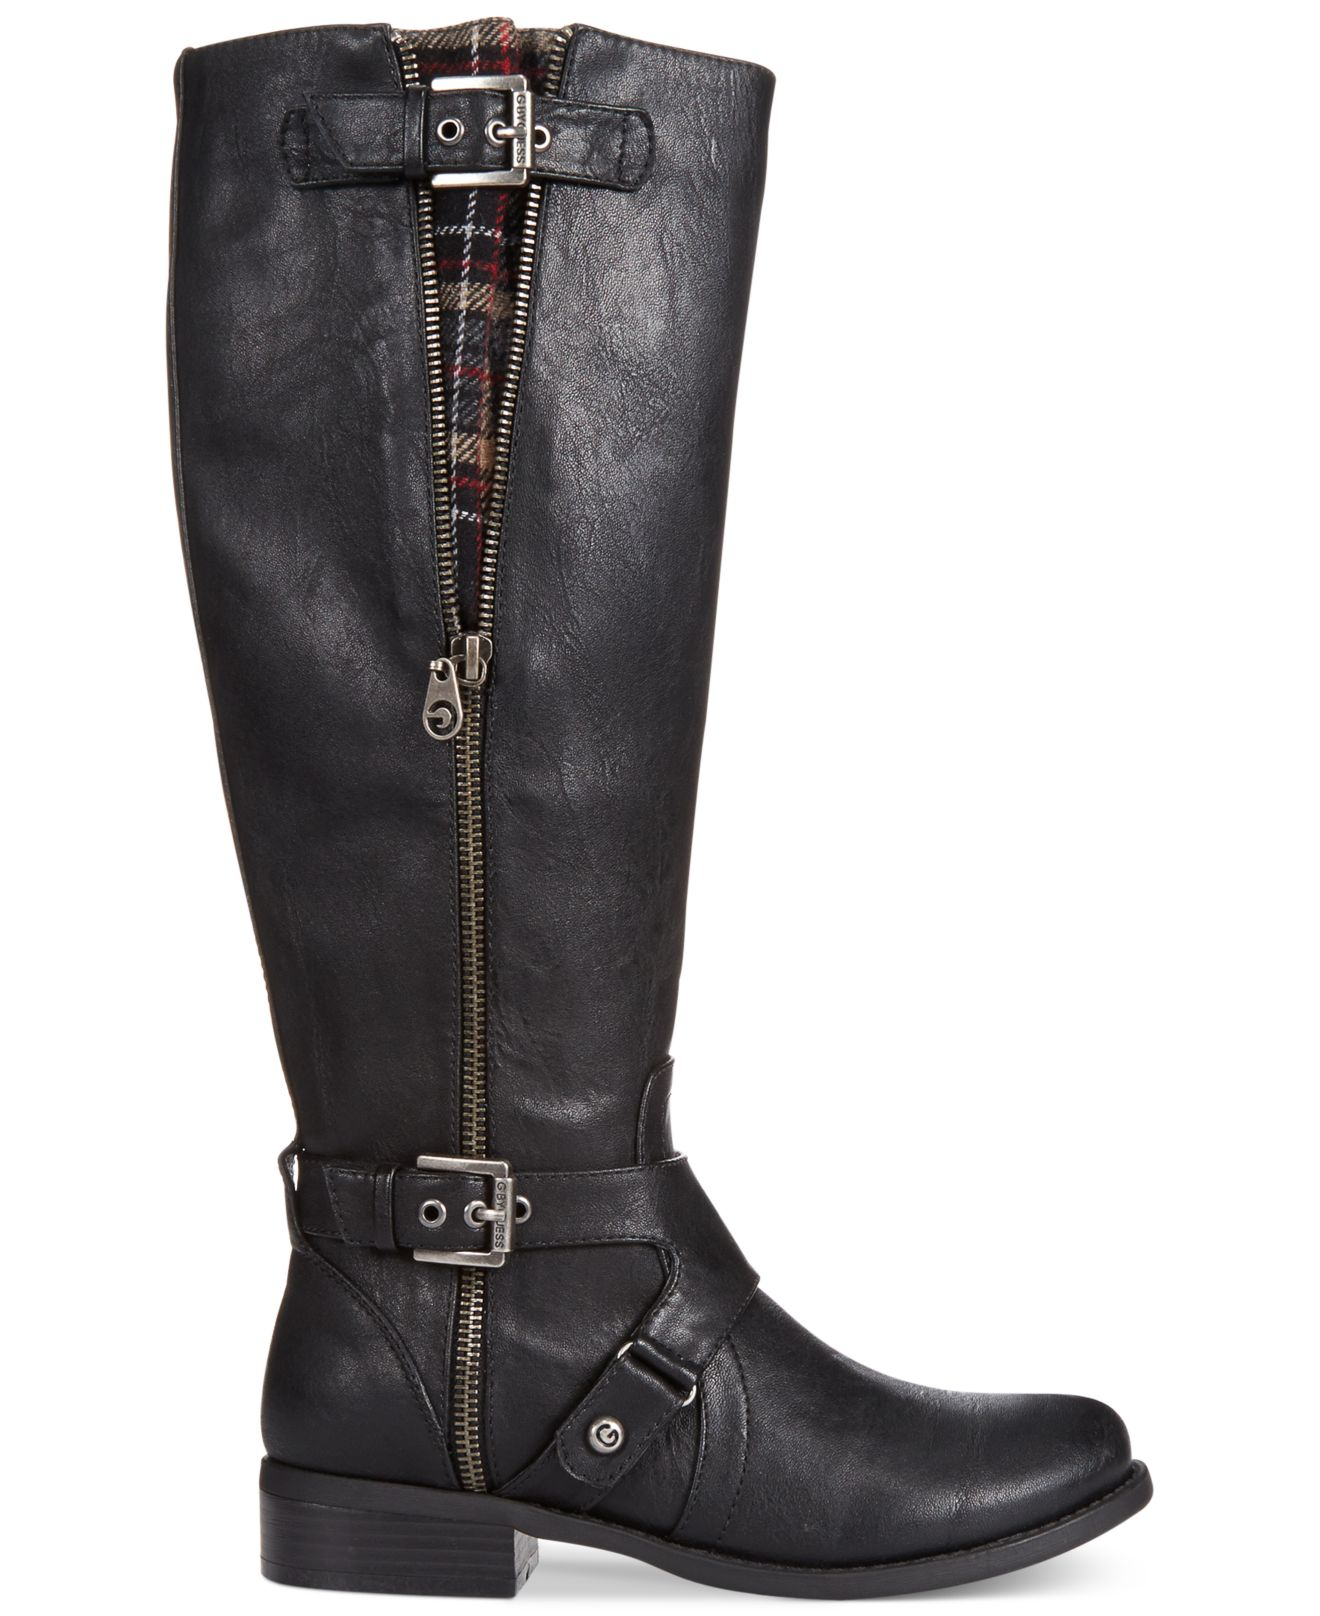 Lyst - G By Guess Women'S Hertle Tall Shaft Wide Calf Riding Boots in Black